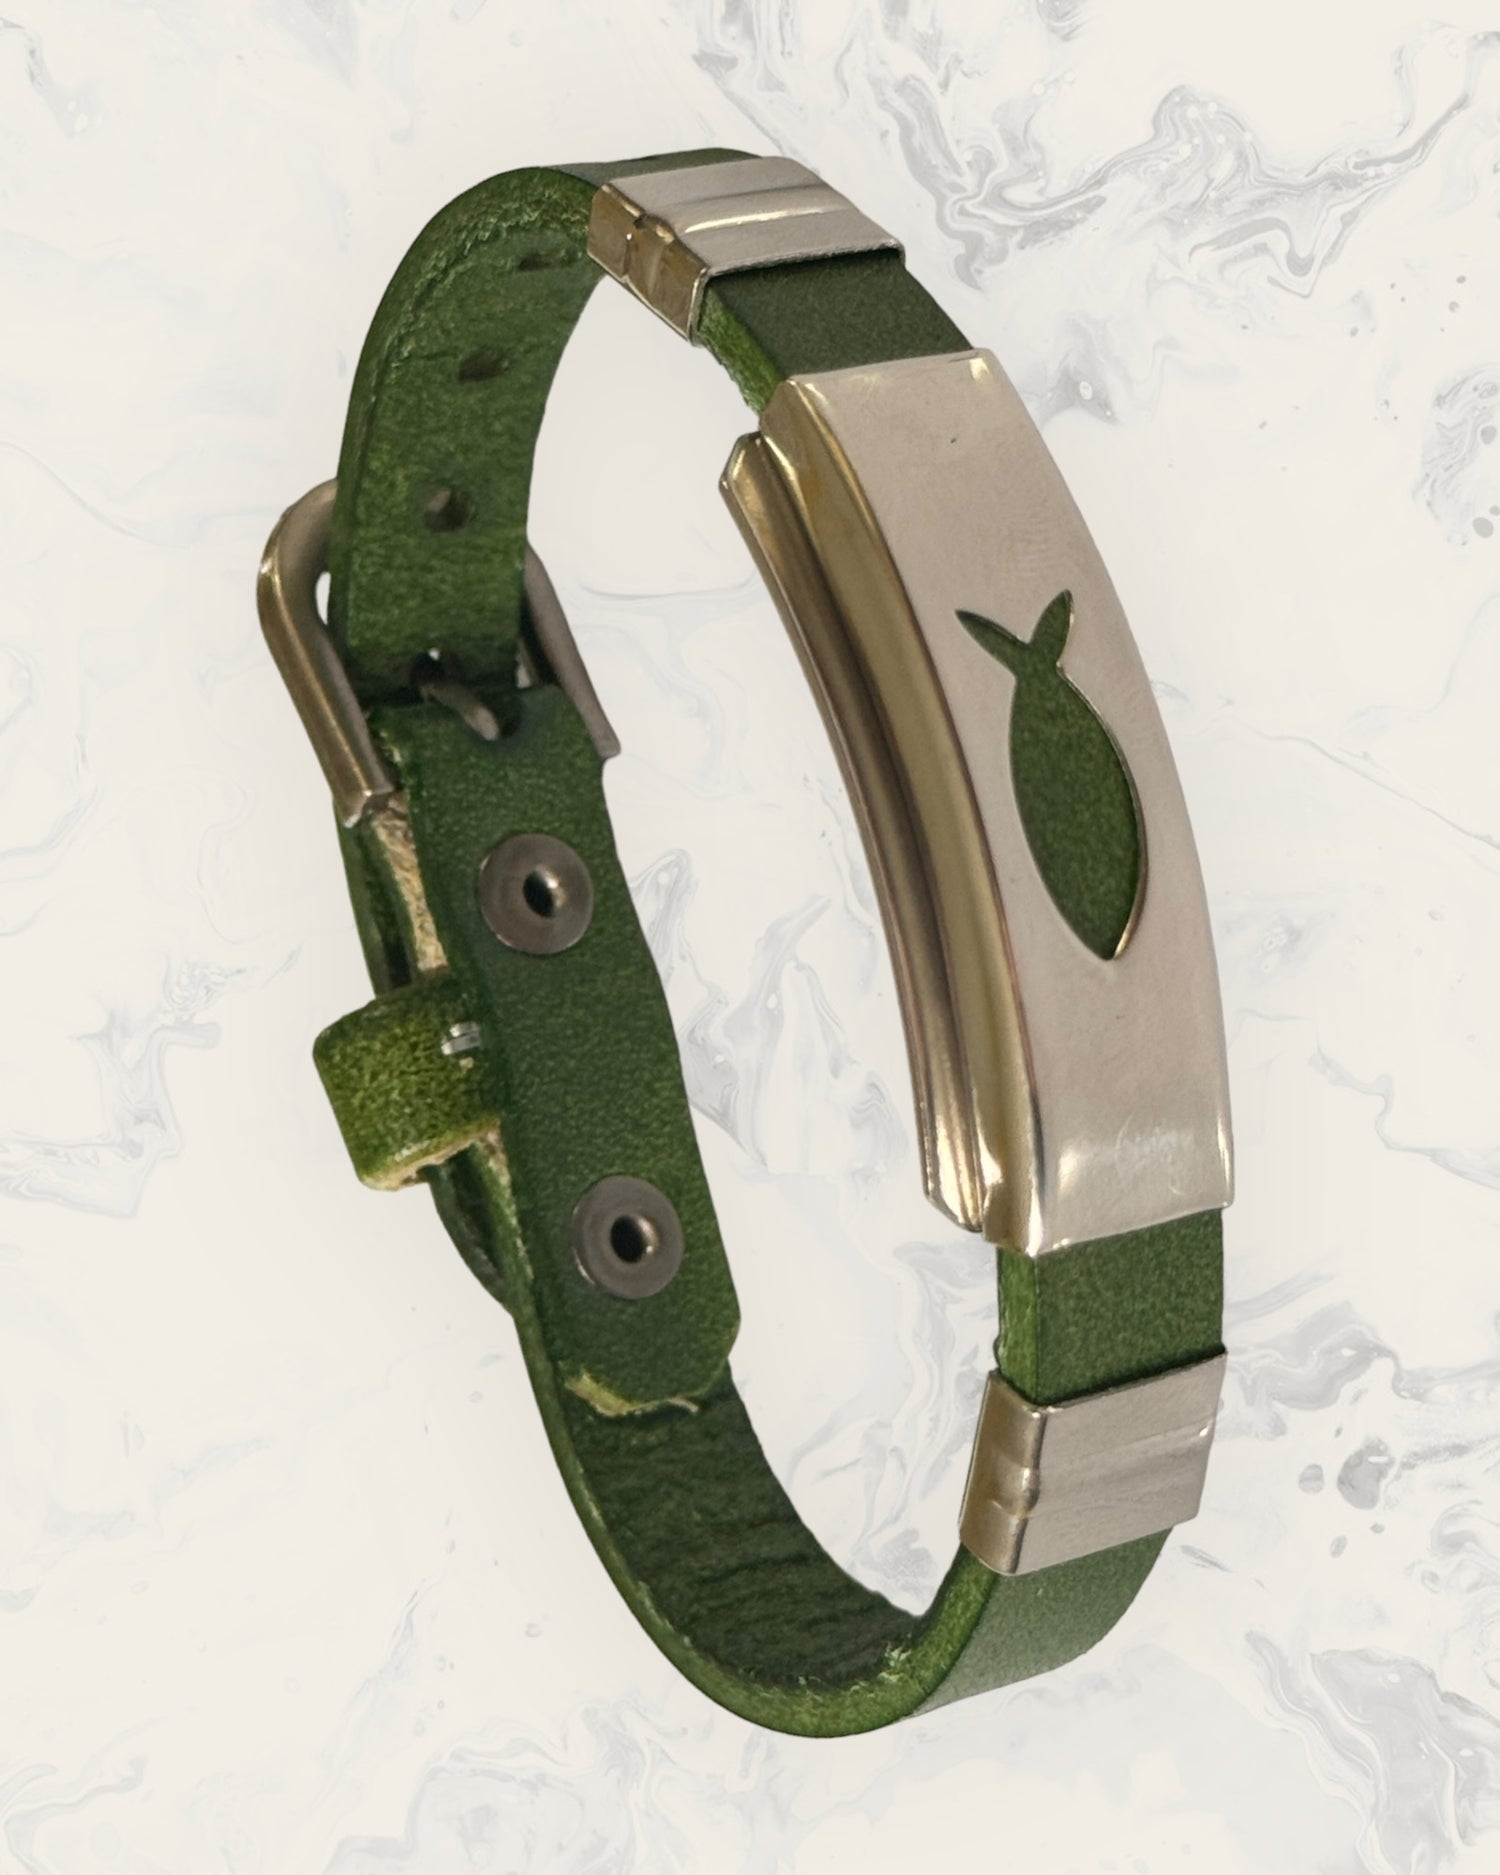 Natural Pain Relief and EMF Protection Bracelet Leather Band Color Green with Christian Fish design on a silver metal slider